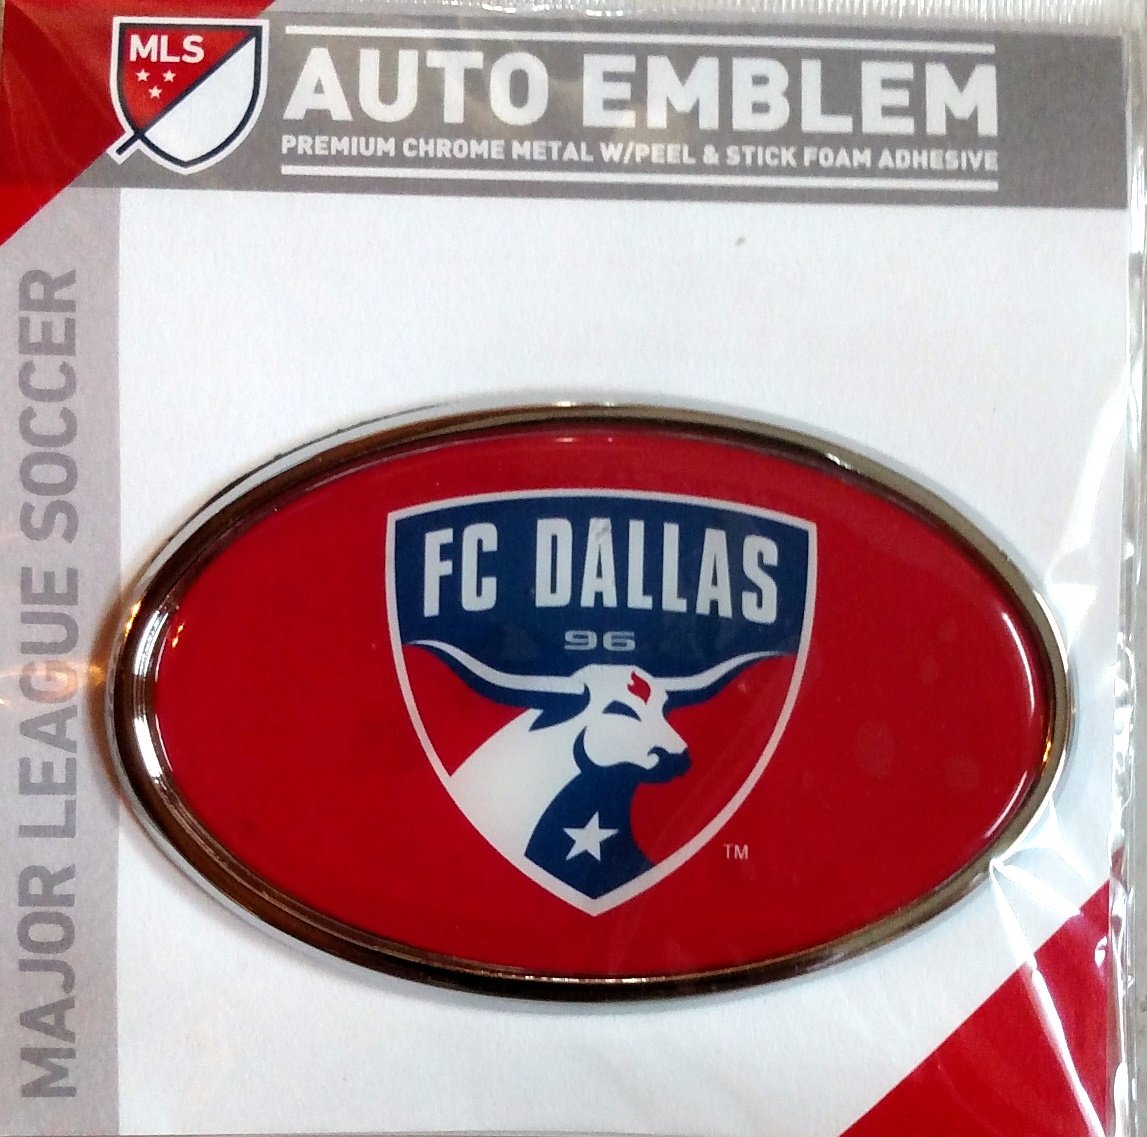 FC Dallas MLS Auto Emblem, Raised Metal Domed Oval Color Chrome, 4 Inch